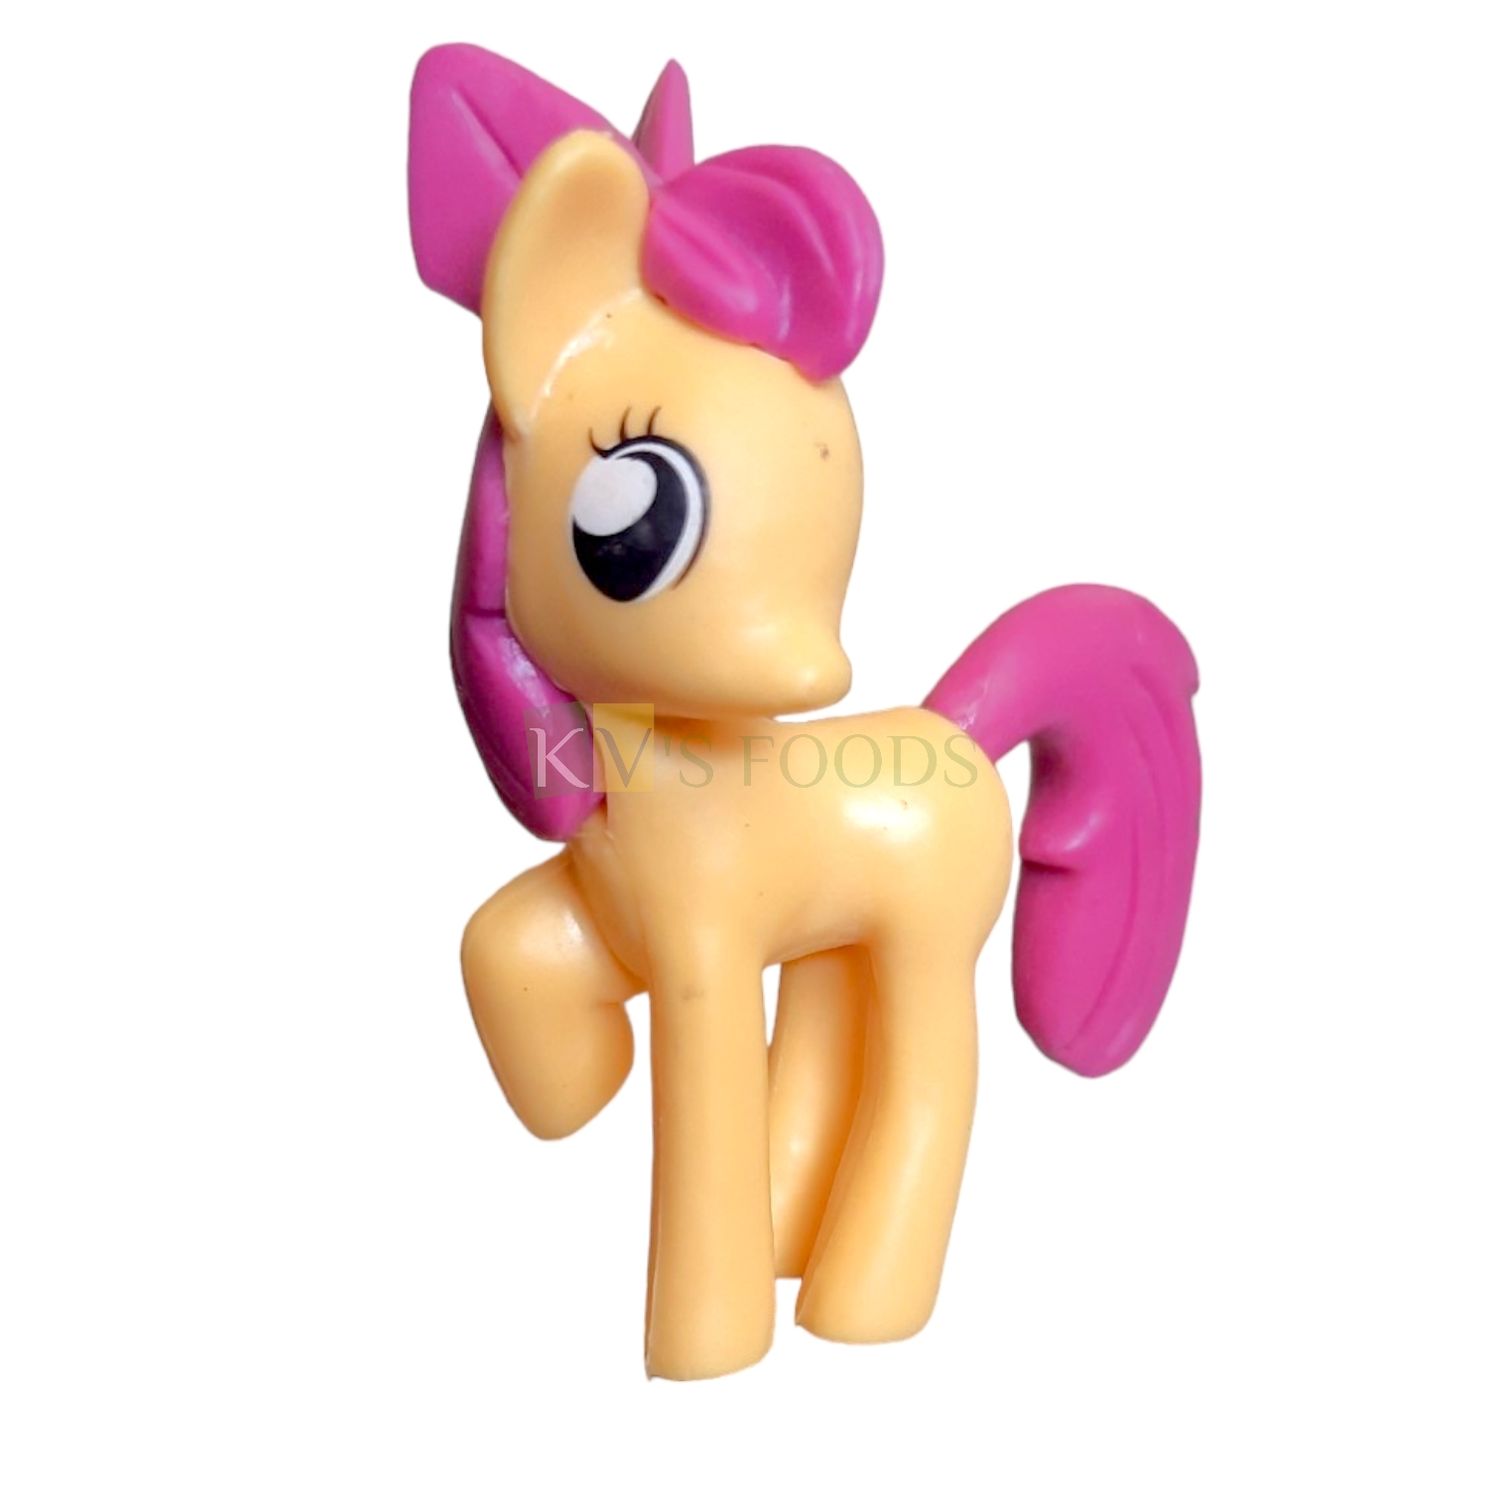 1PC Length 2 Inch, Big Apple Bloom Light Orange, Pink My Little Pony Friends Miniature Character Cake Topper, Action Horses Animal Figure, Kids Girl Birthday Party, Children&#39;s Play Toy Room Decoration